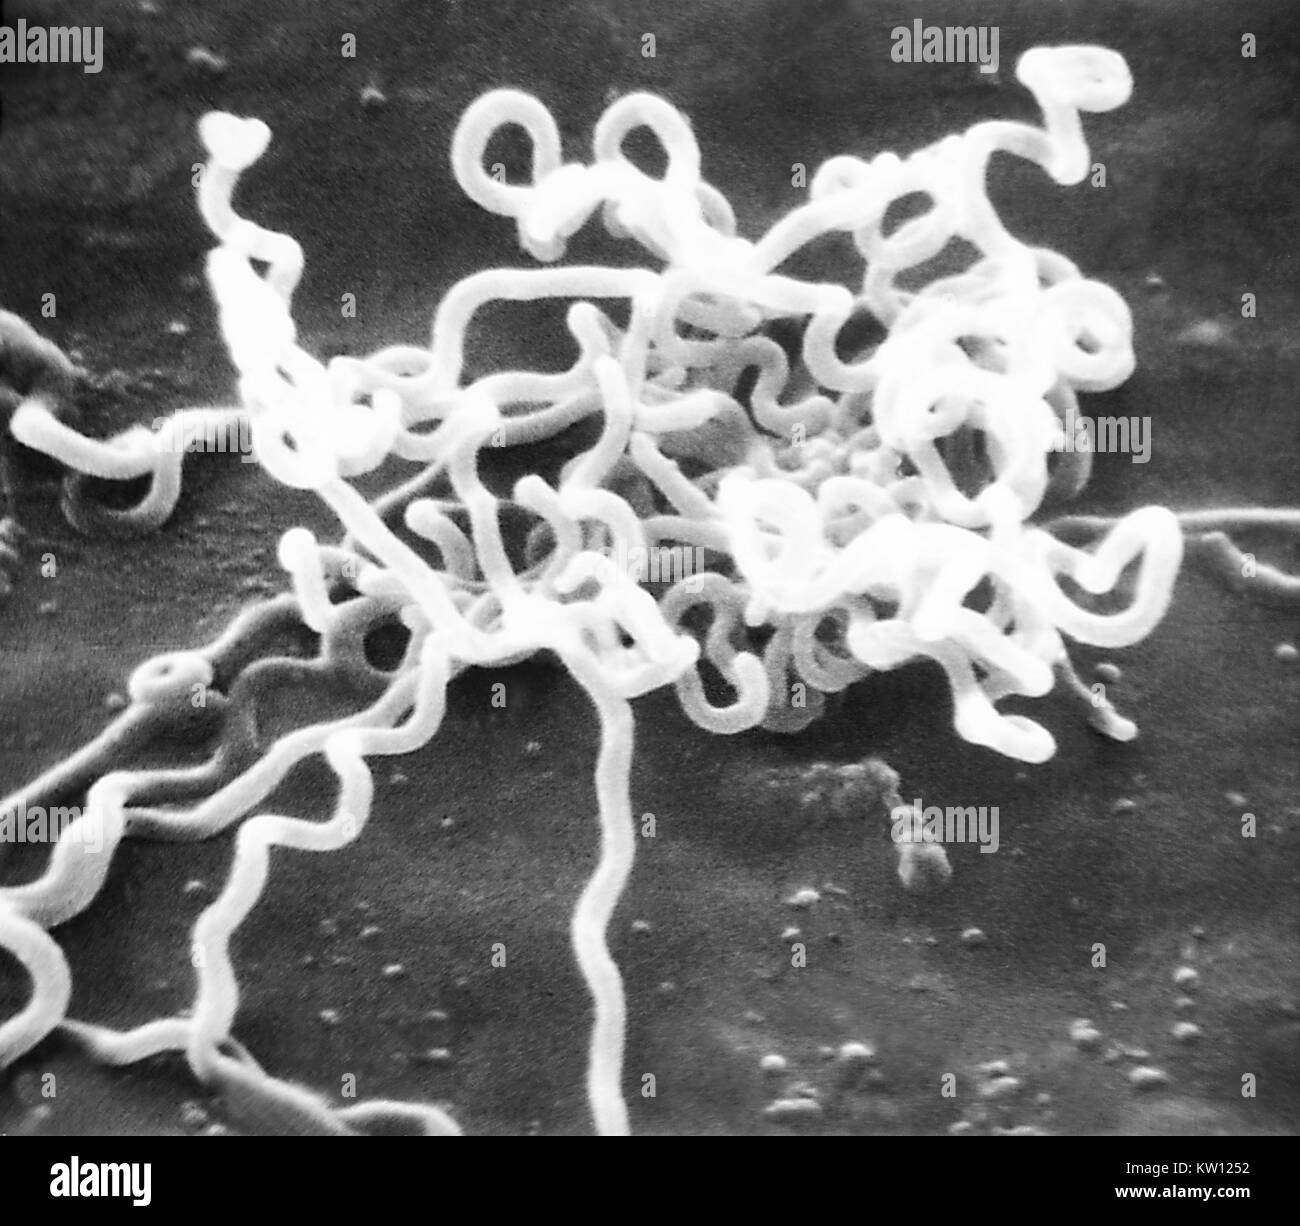 Electron micrograph of Treponema pallidum on cultures of cotton-tail rabbit epithelium cells (Sf1Ep). Treponema pallidum is the causative agent of syphilis. In the United States, over 35, 600 cases of syphilis were reported by health officials in 1999. Image courtesy CDC/Dr. David Cox, 1980. Stock Photo